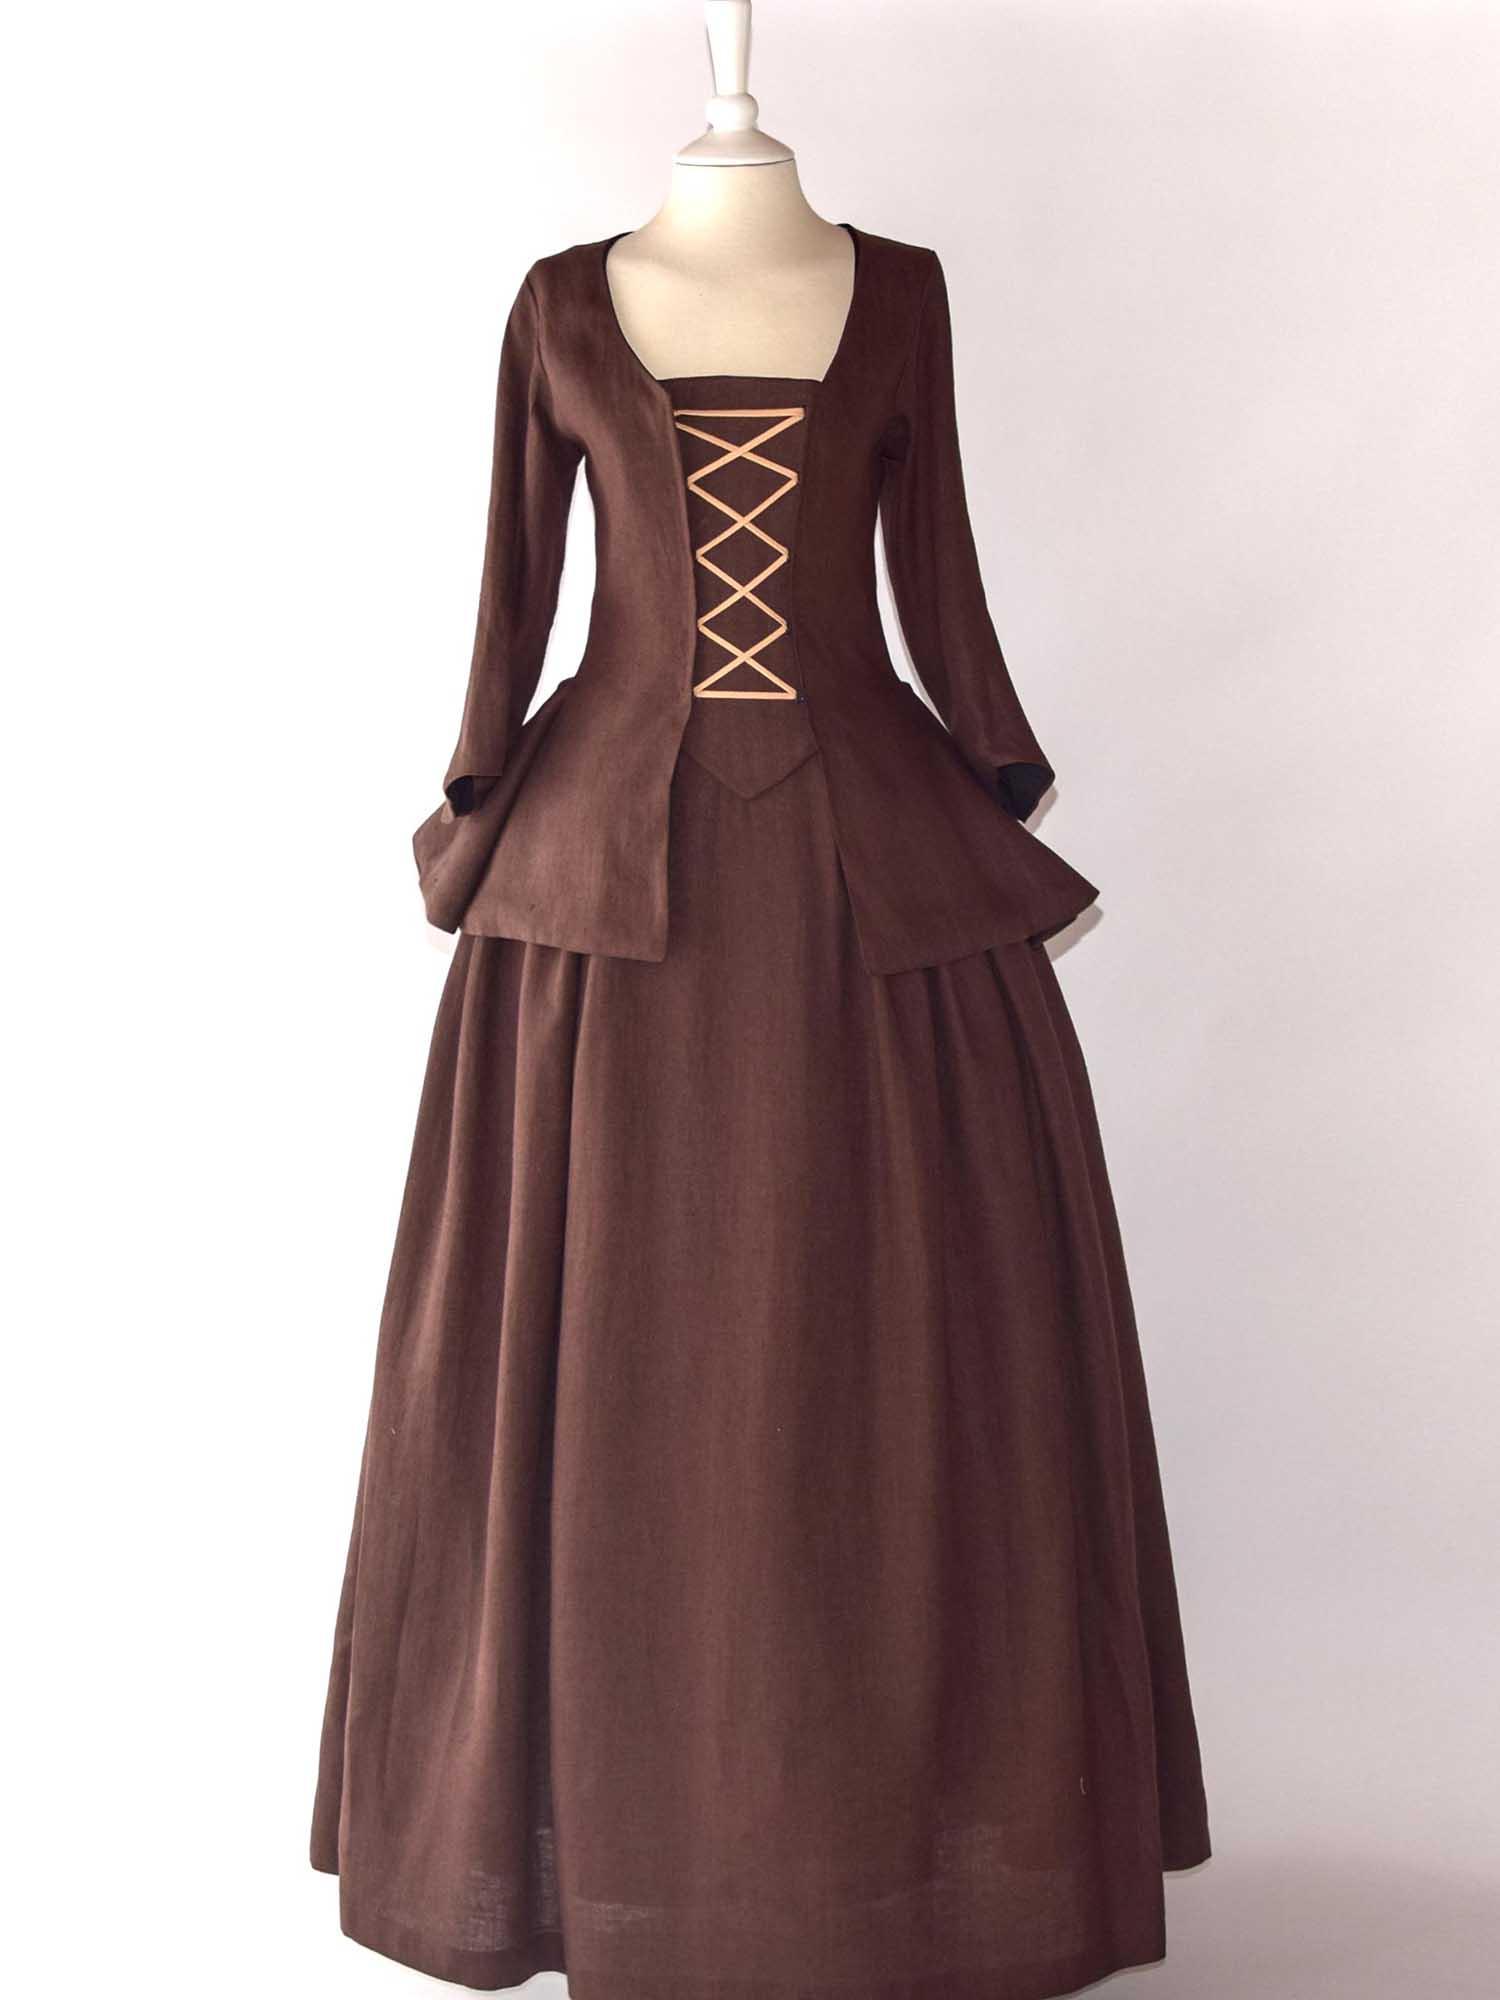 JANET, Colonial Costume in Chocolate Linen - Atelier Serraspina